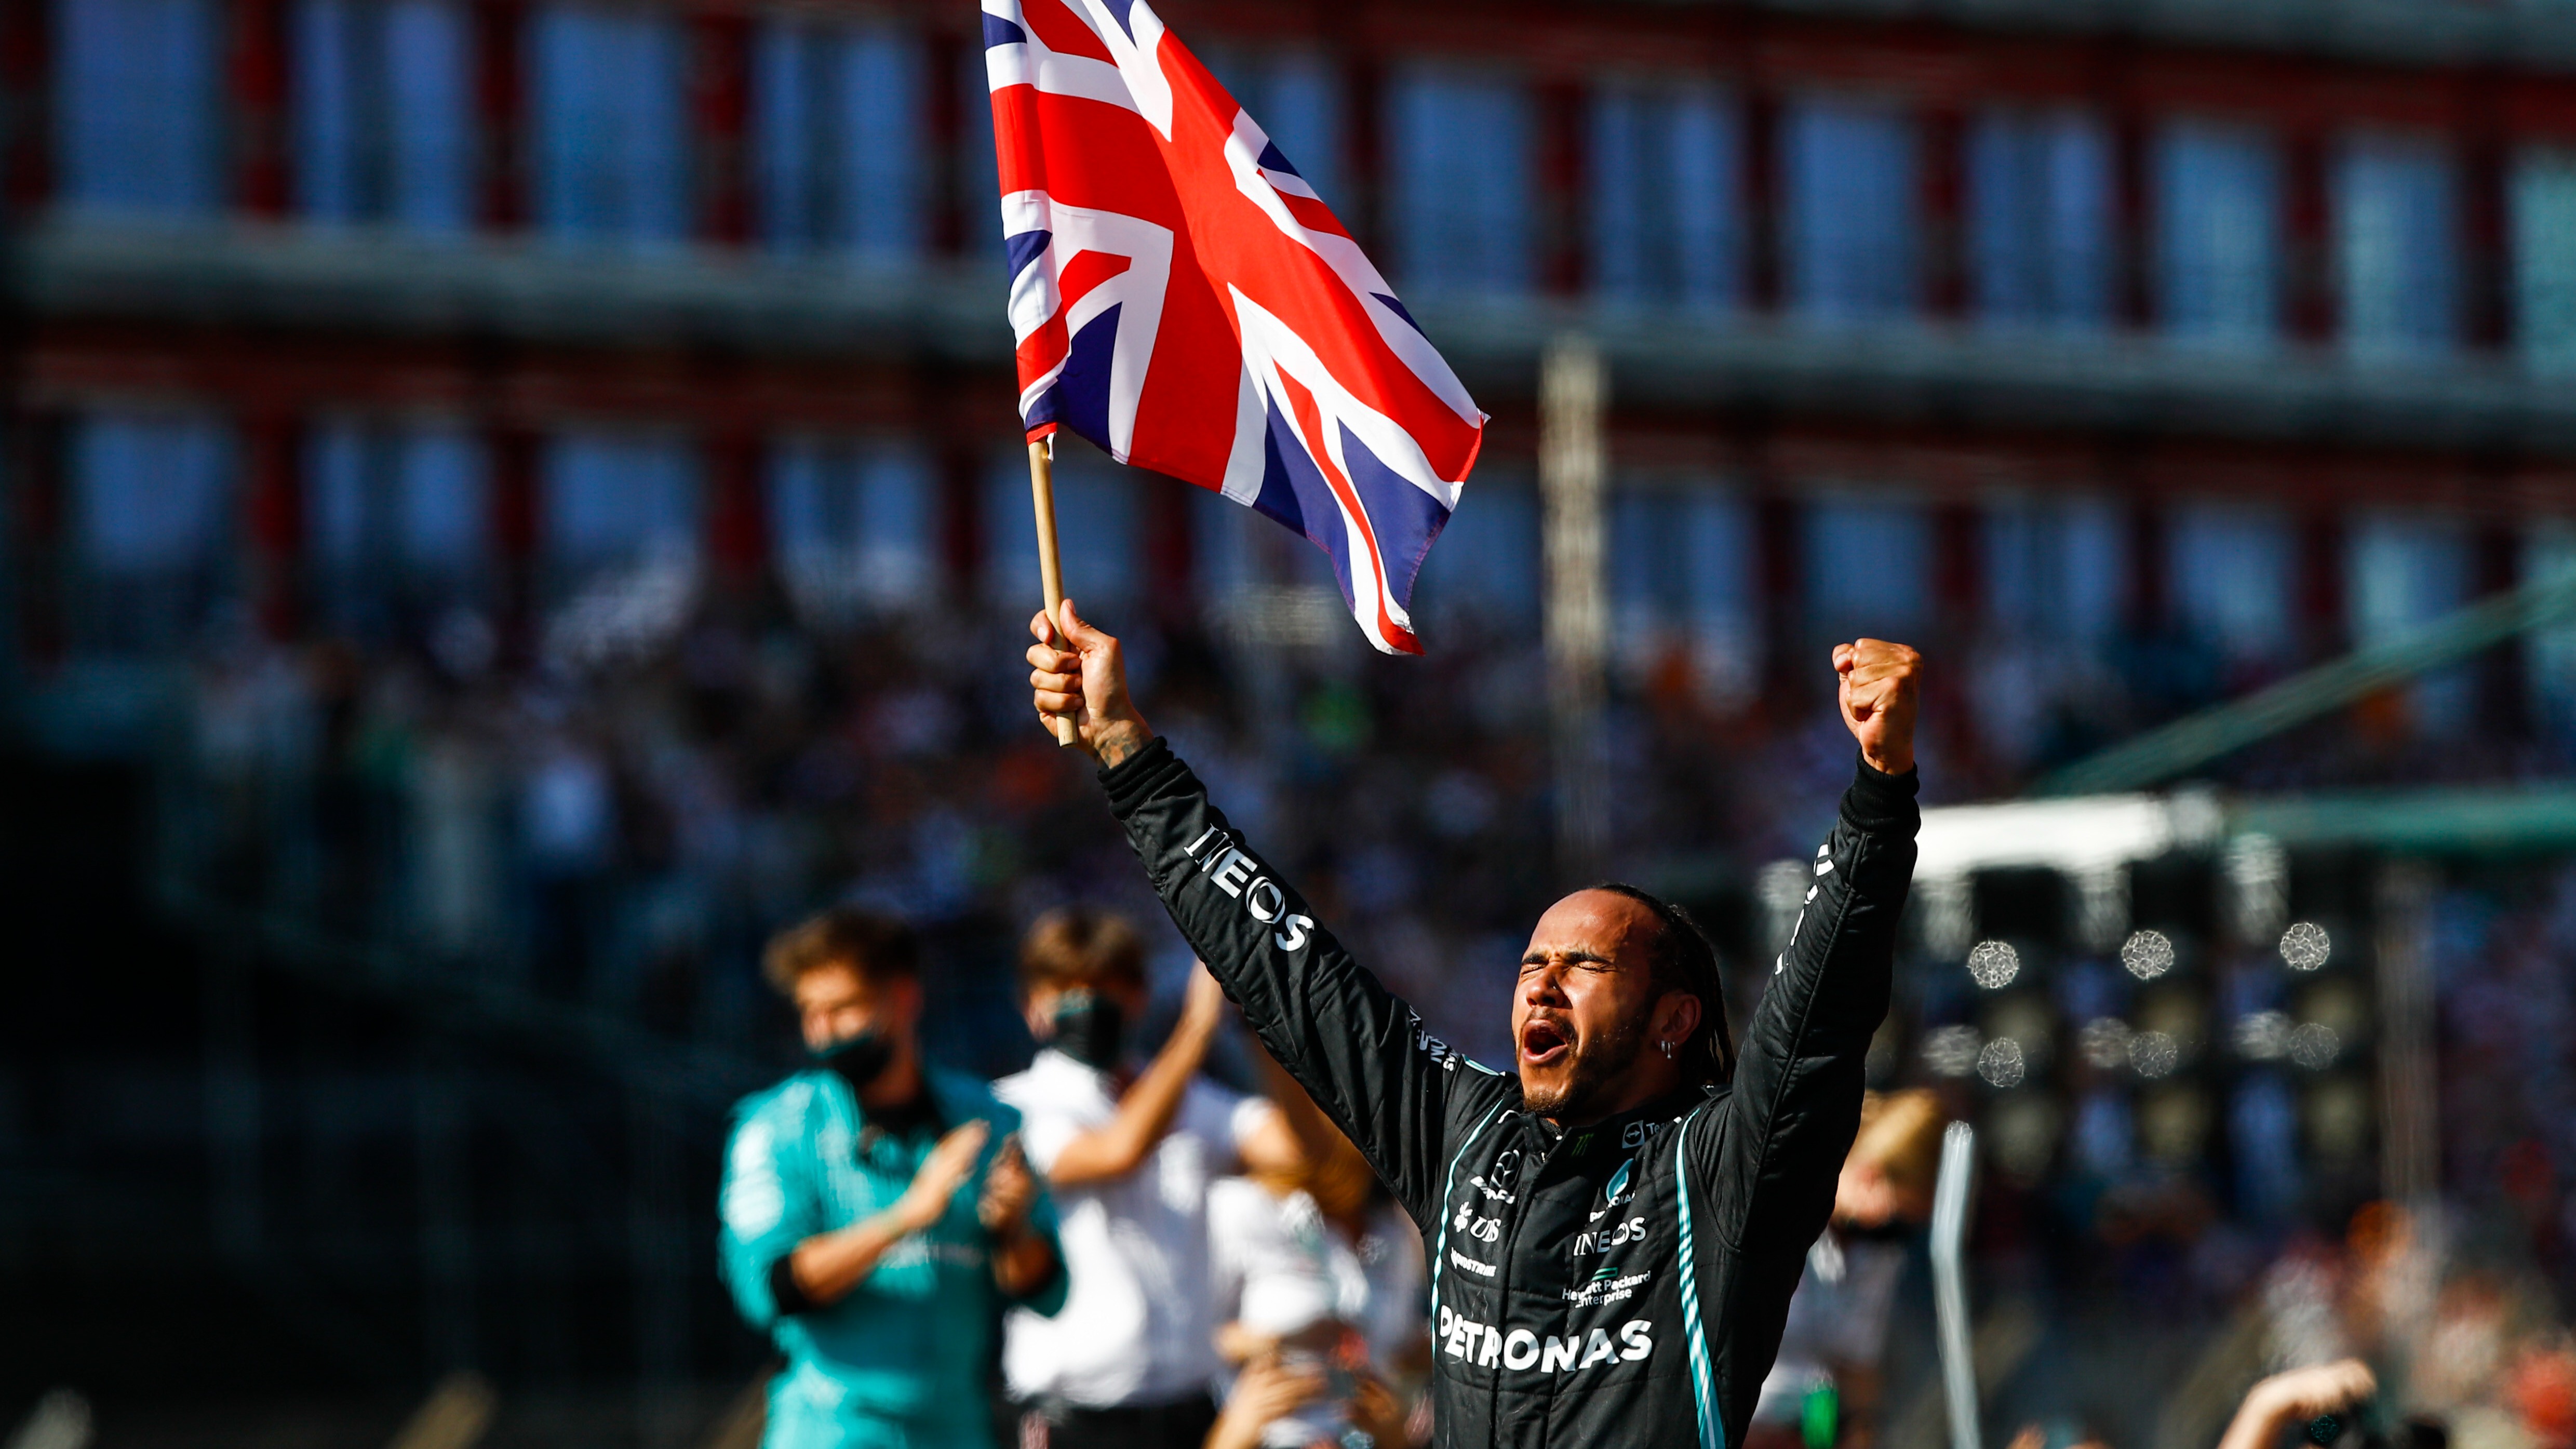 When and where can I watch the Formula 1 British Grand Prix at Silverstone and is it on free TV? ITV News Anglia